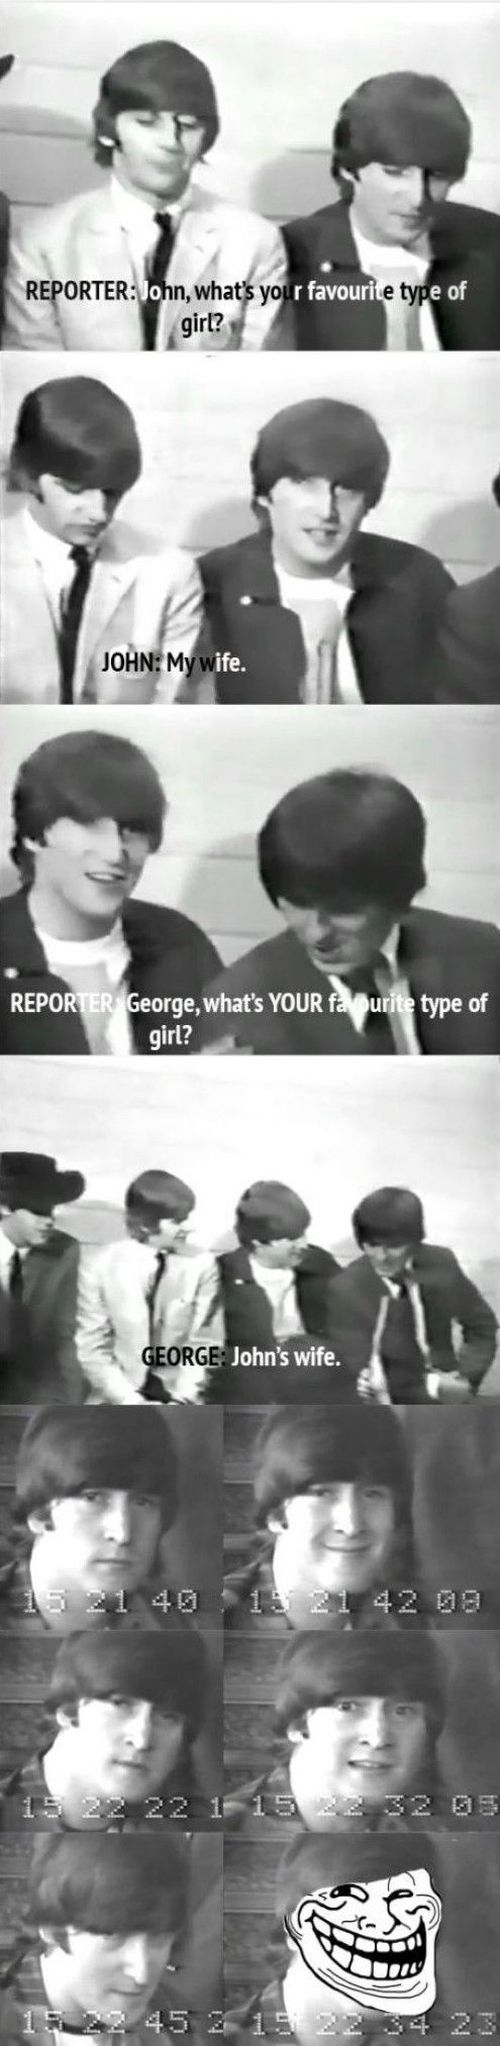 How The Beatles Answered the Questions (10 pics)